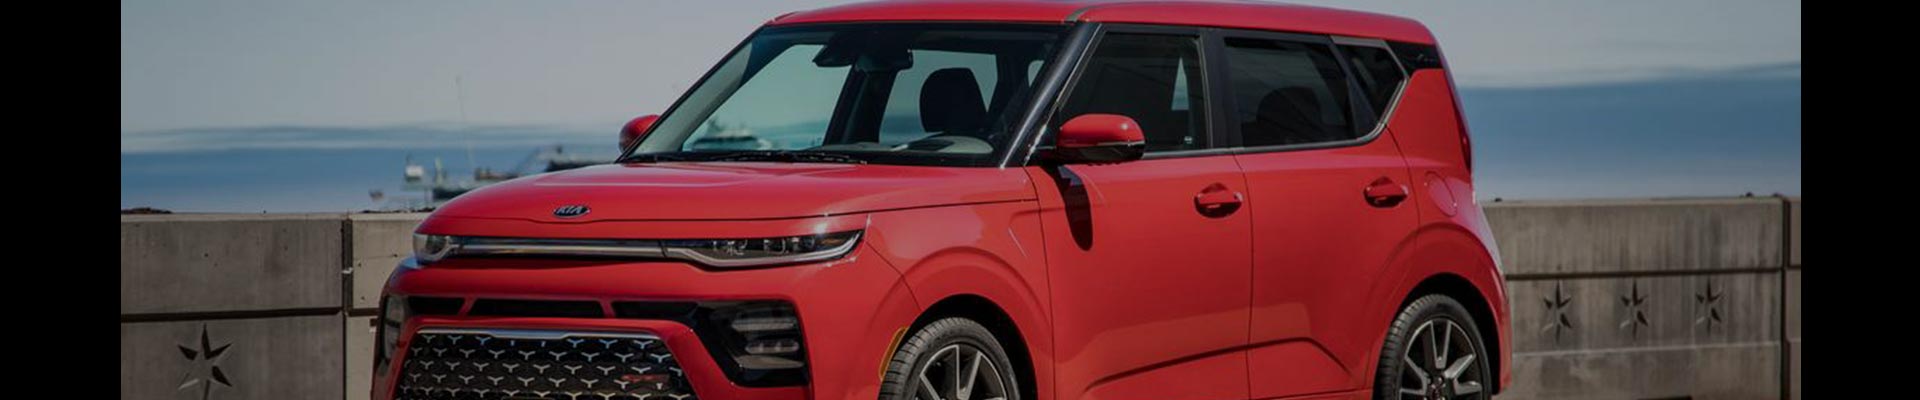 Shop Replacement and OEM 2019 Kia Soul Parts with Discounted Price on the Net